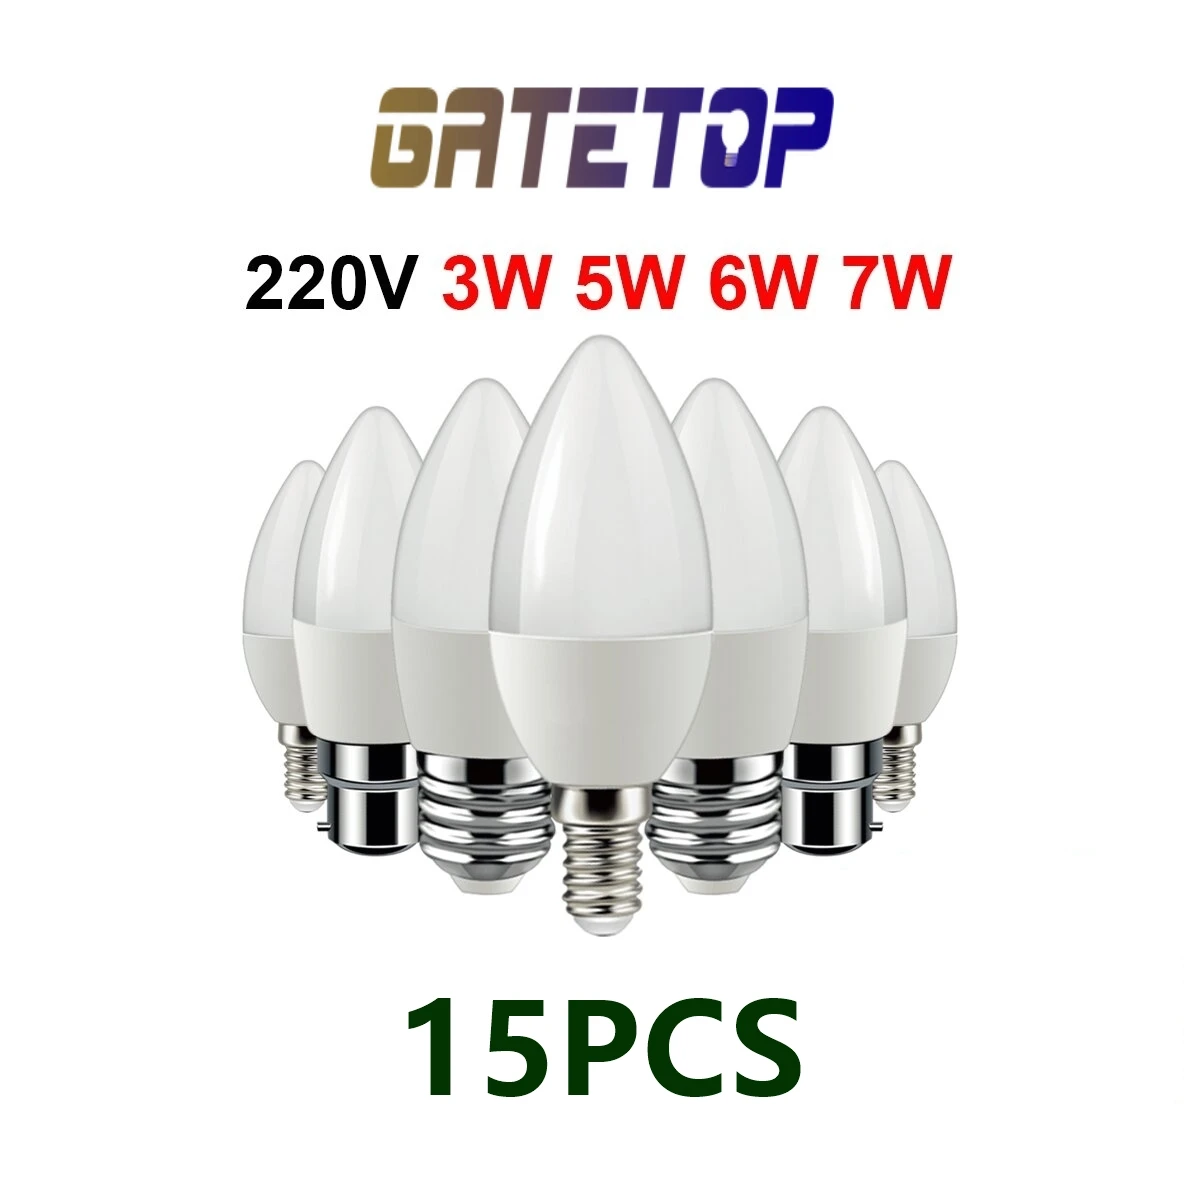 

15Pcs Led Candle Bulb C37 3w 5w 6w 7w E14 E27 B22 E14 AC220V-240V Warm White Cold White Daylight For Home Decoration Lamp